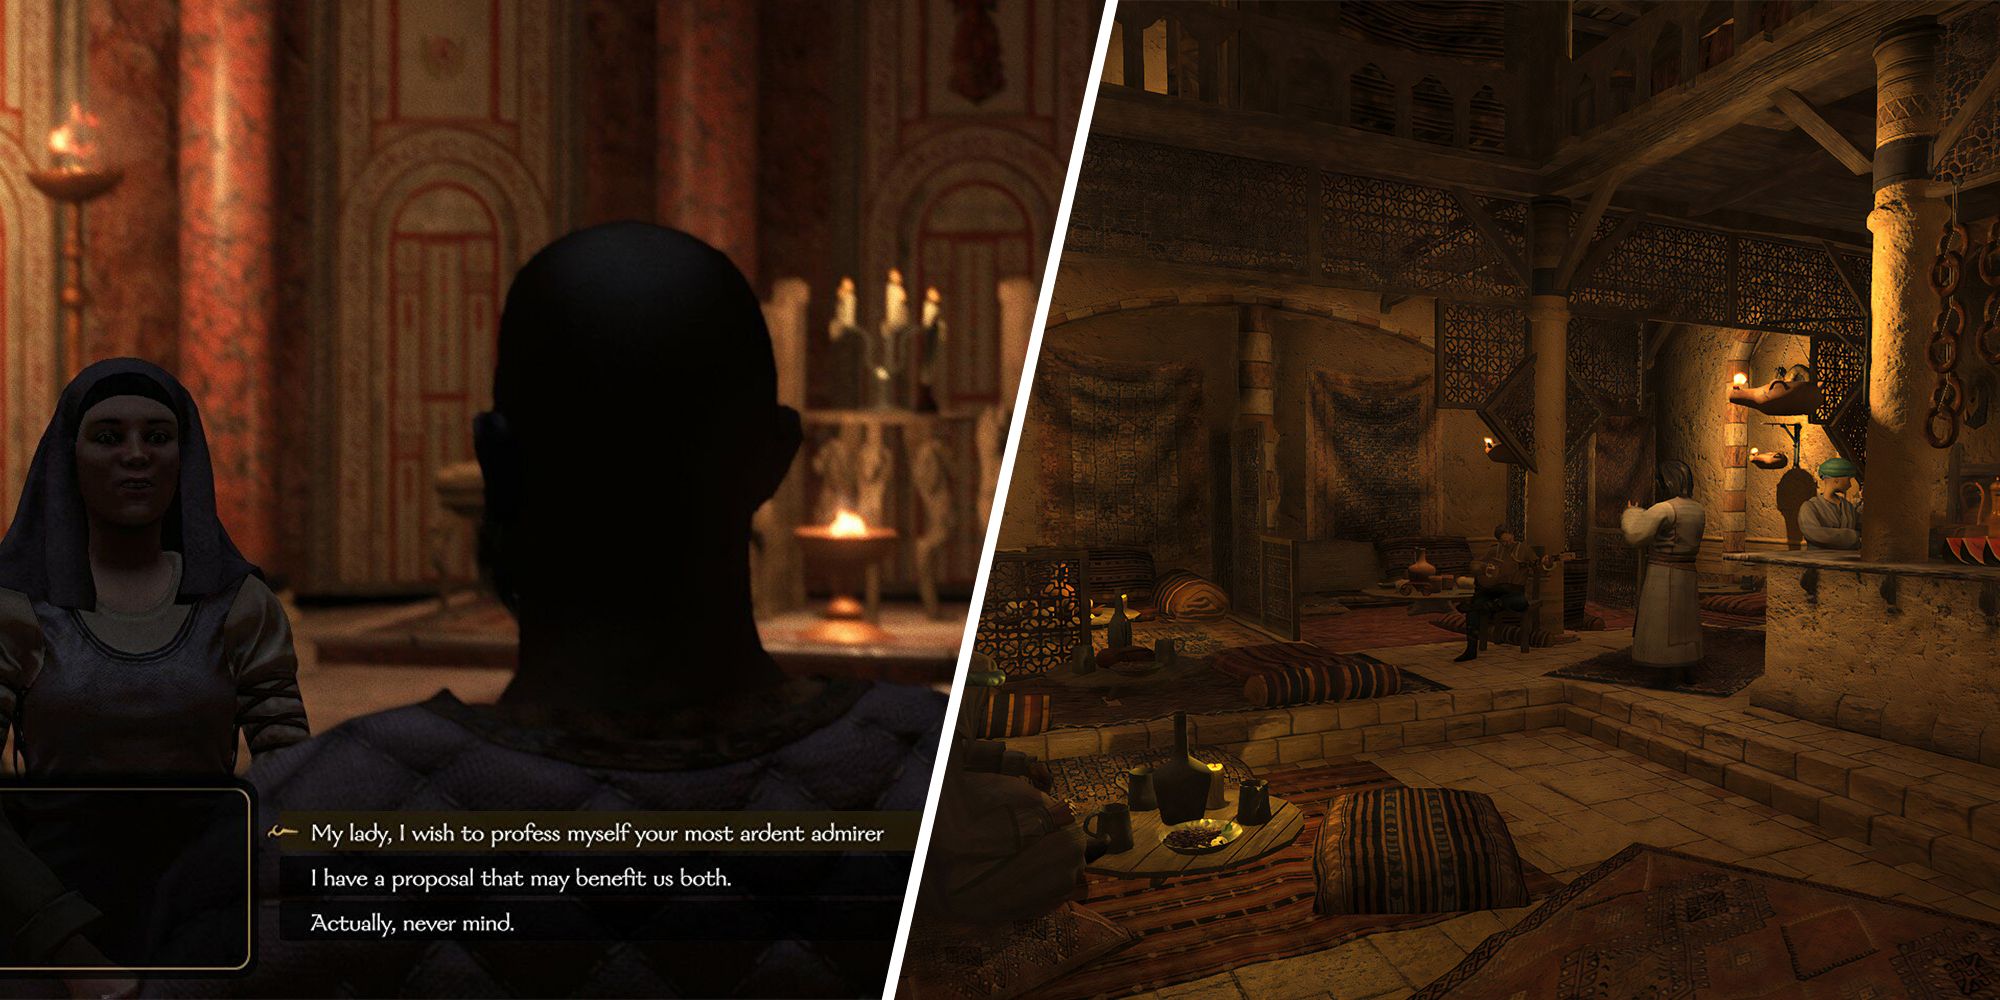 Mount & Blade 2 Bannerlord Split image of a tavern in the game and talking with a noble lady